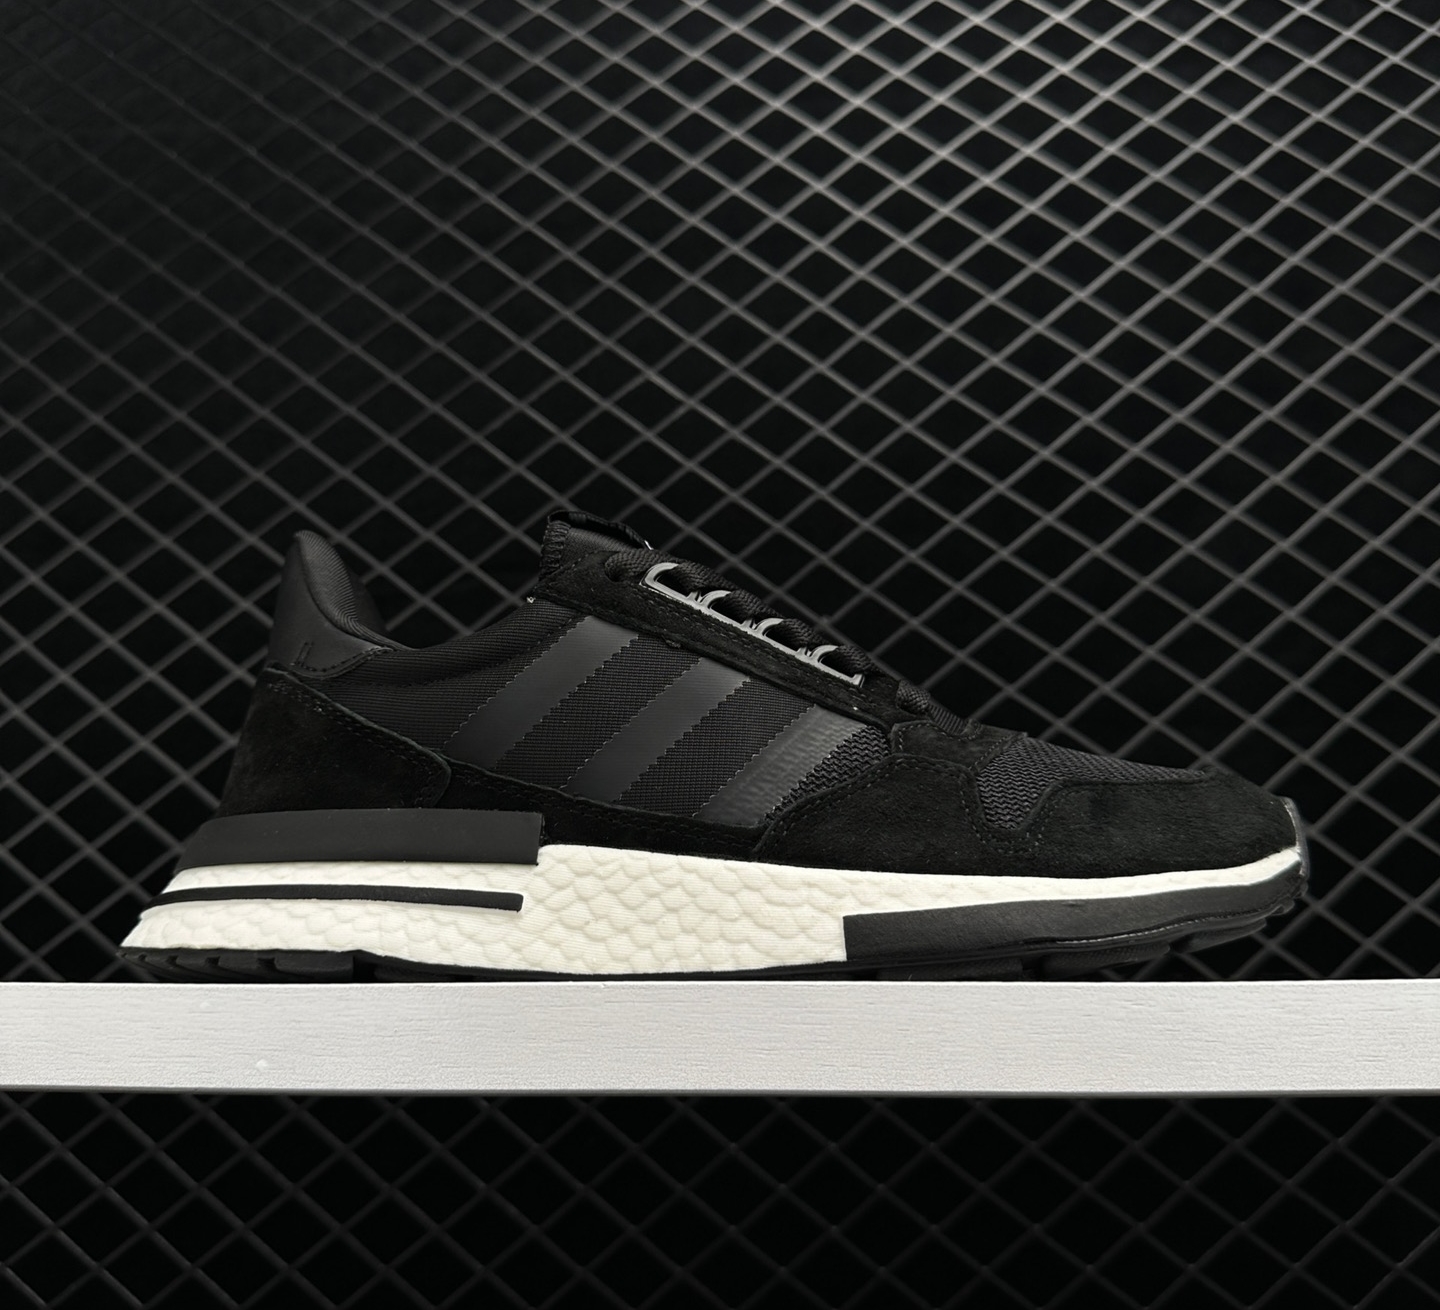 Adidas ZX 500 RM 'Core Black' B42227 - Stylish Sneakers for Men